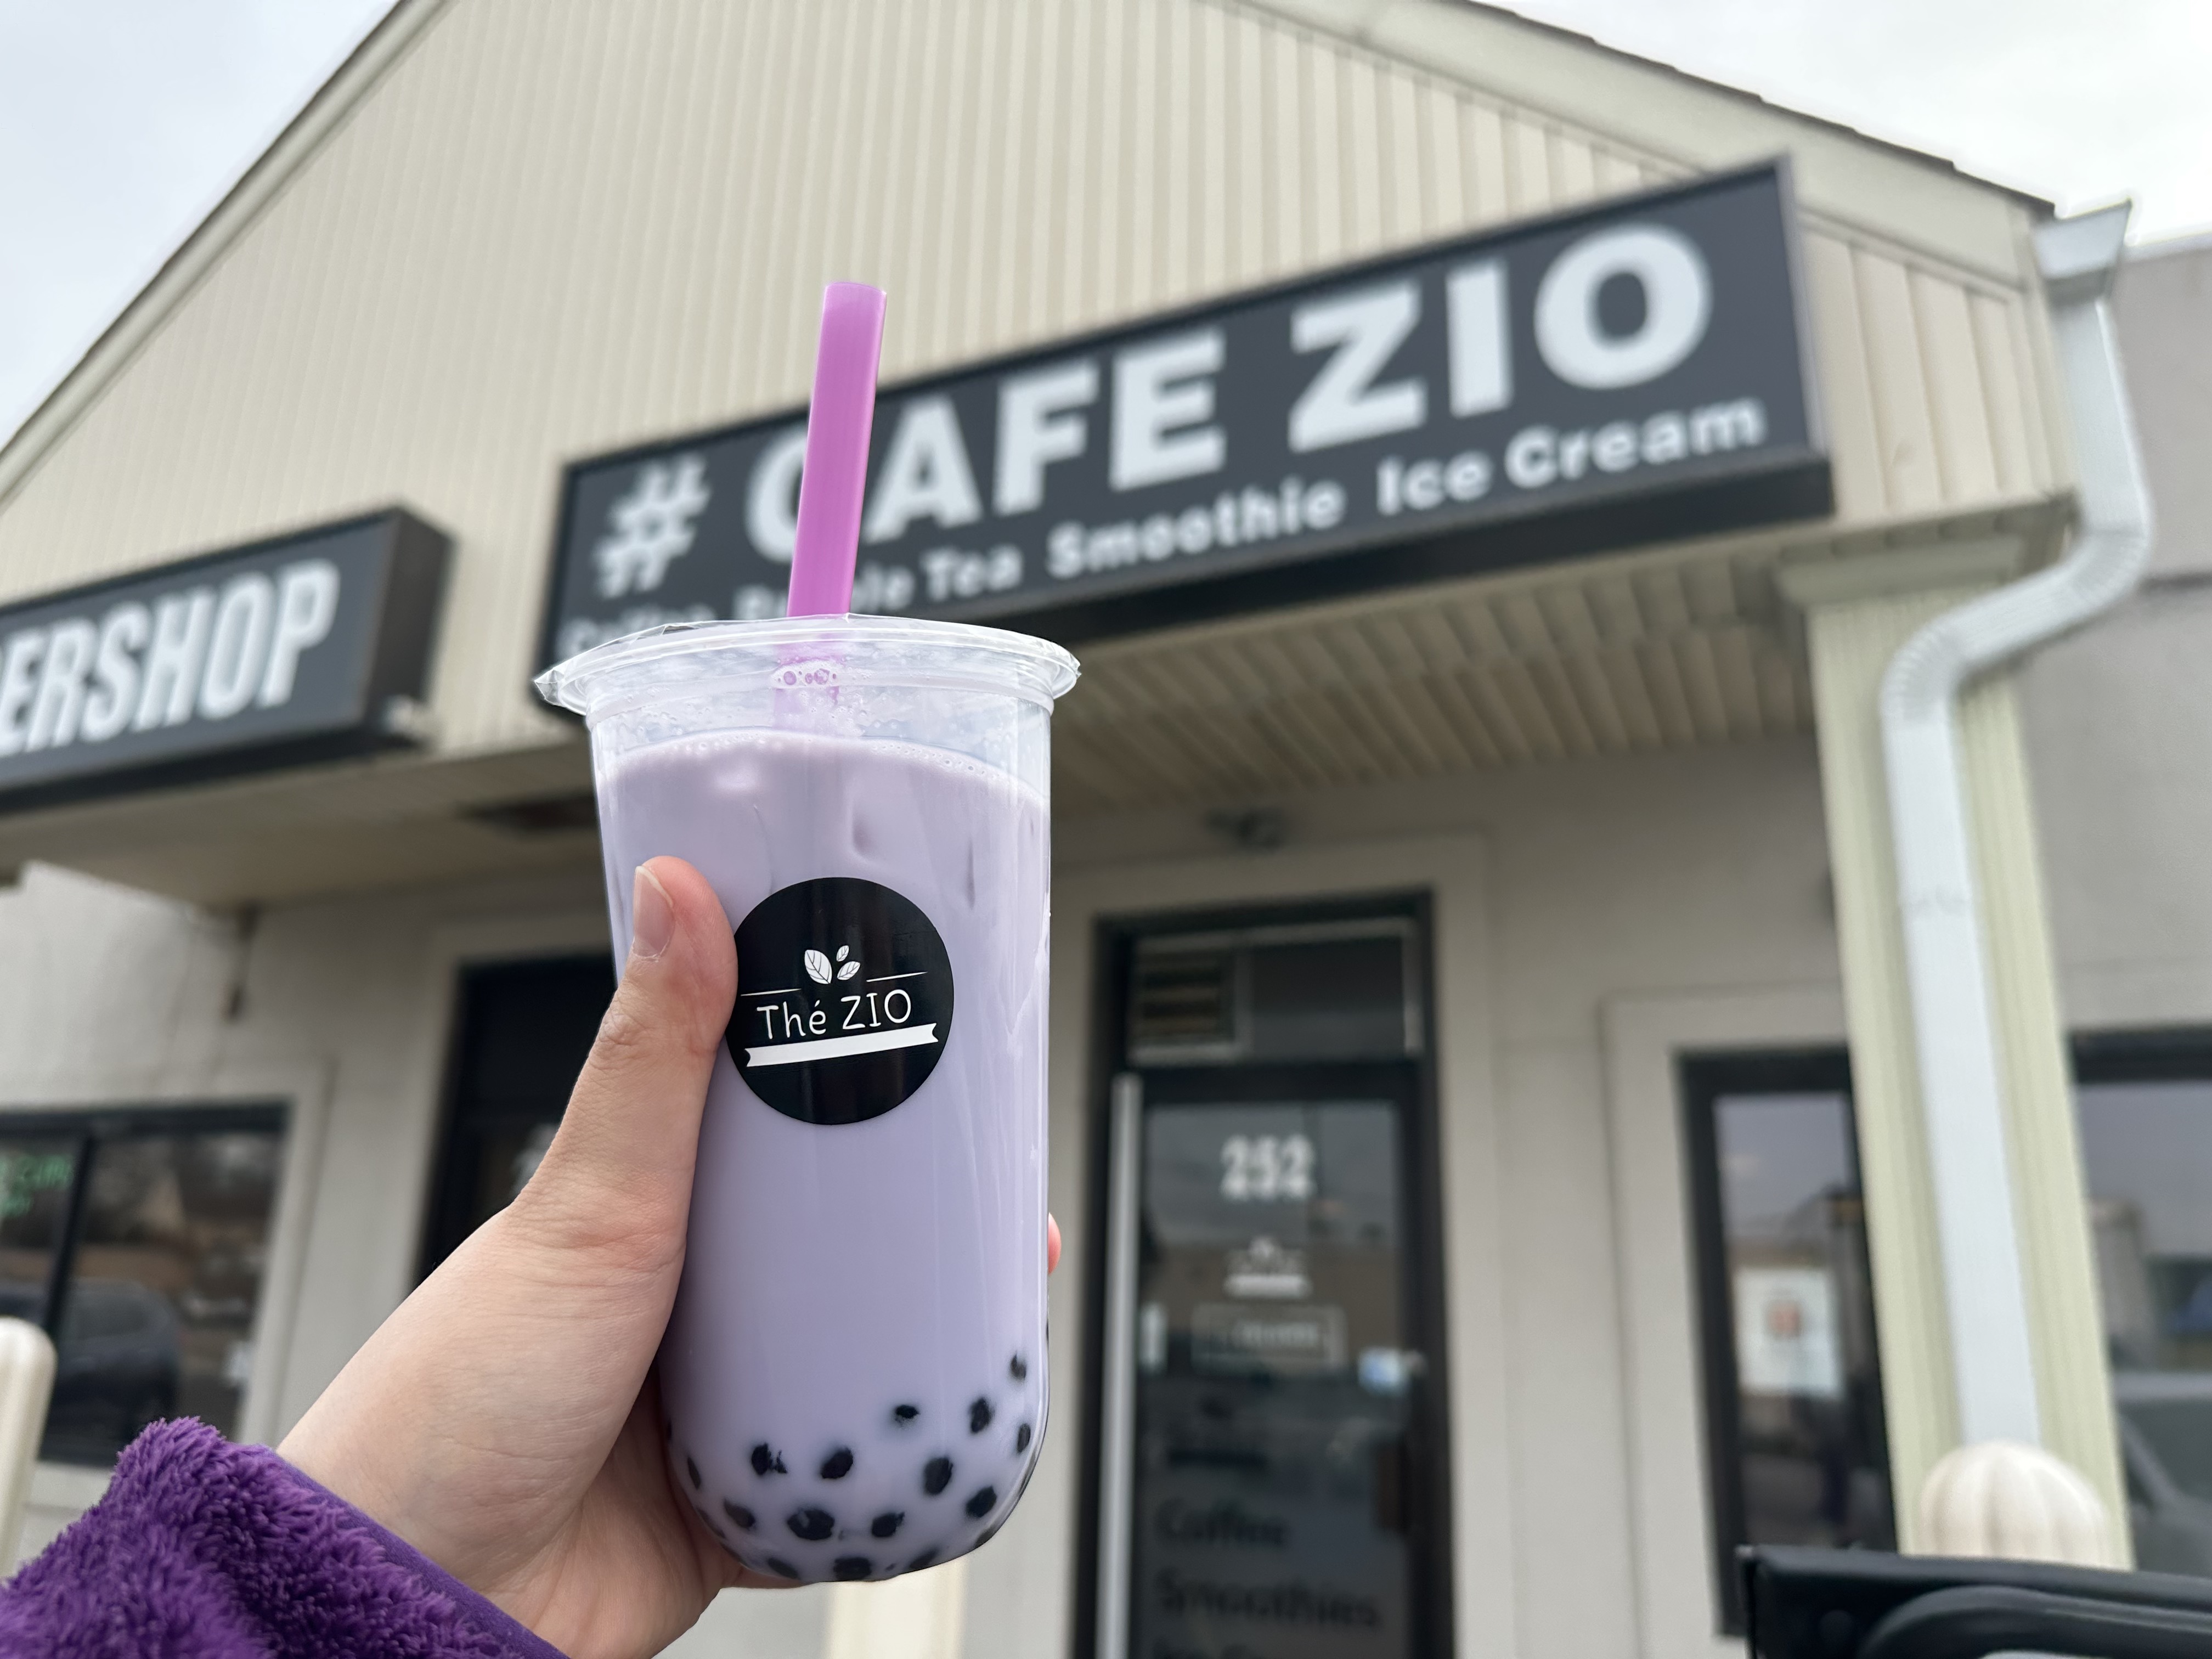 How Much Do Bubble Tea Shop Owners Make?